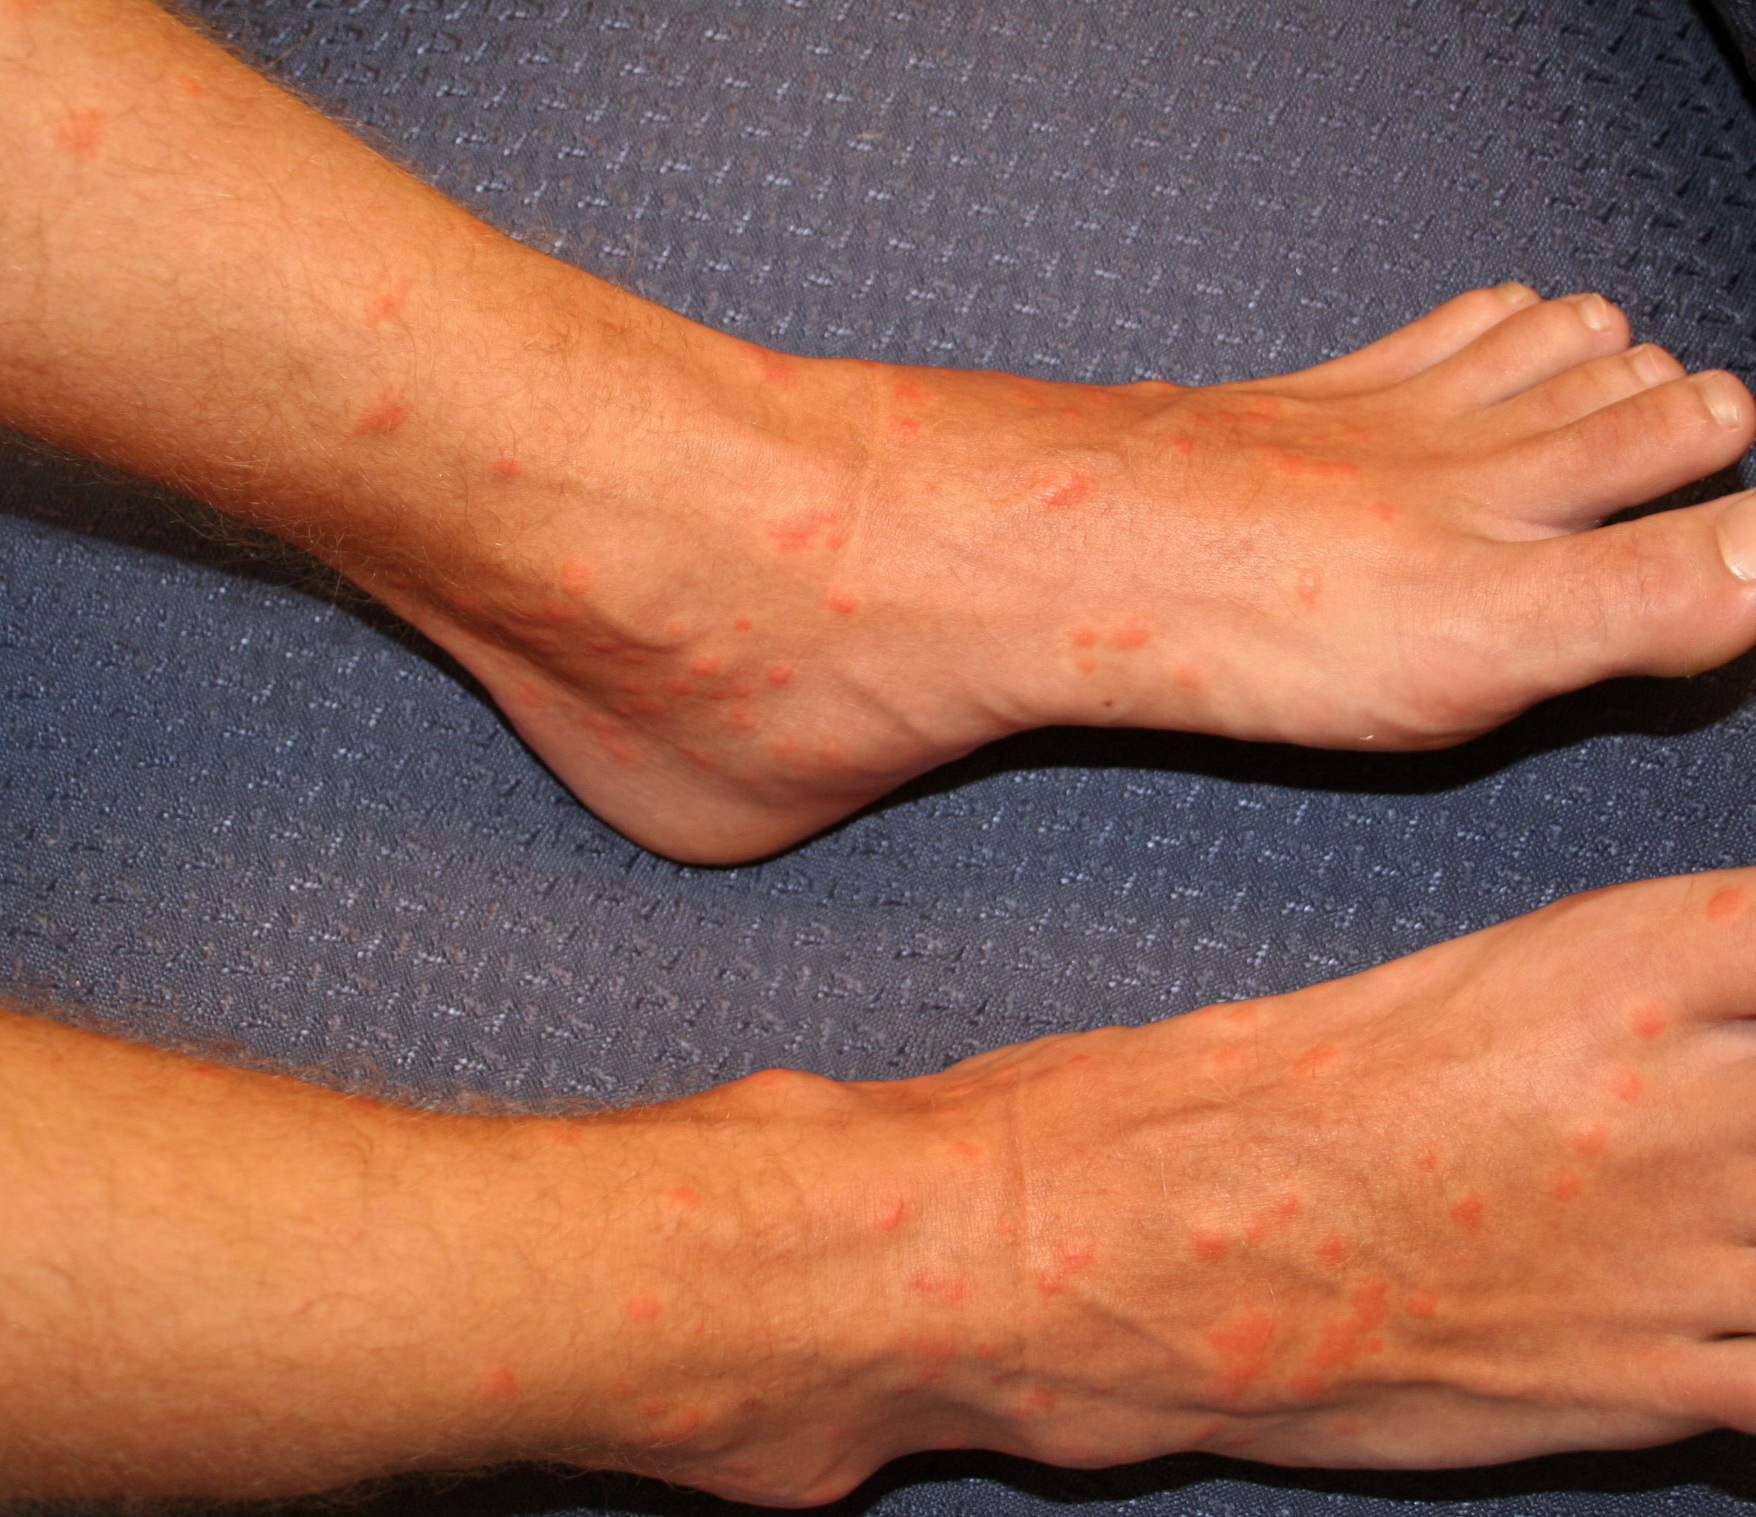 Contact Urticaria Syndrome Treatment & Management ...